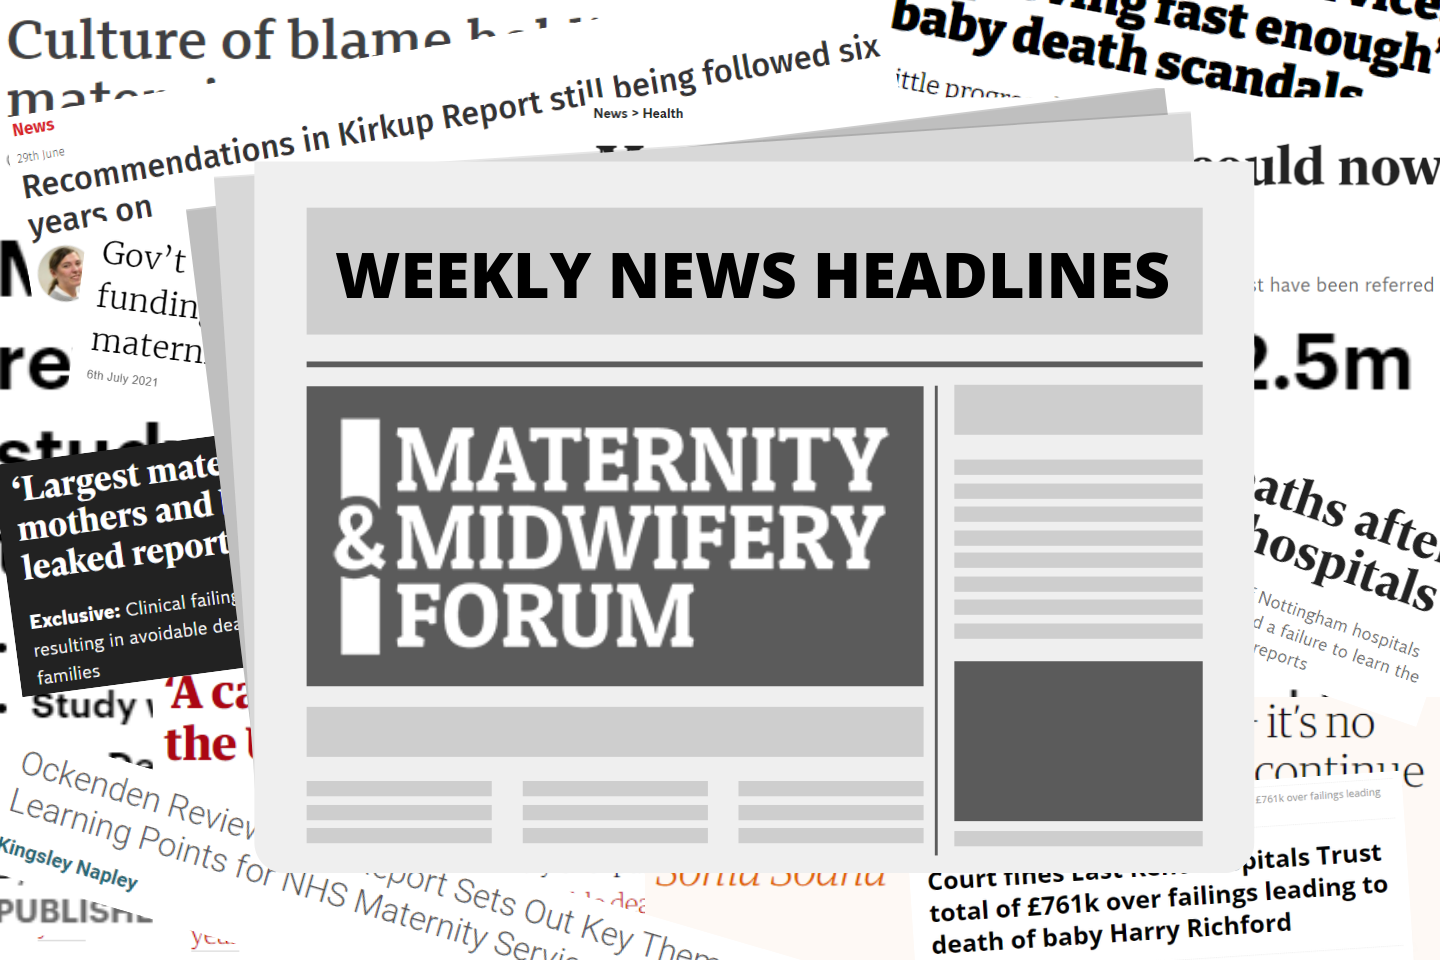 https://www.maternityandmidwifery.co.uk/wp-content/uploads/2022/01/Maternity-and-Midwifery-Forum-Article-Graphic-Website-2.png